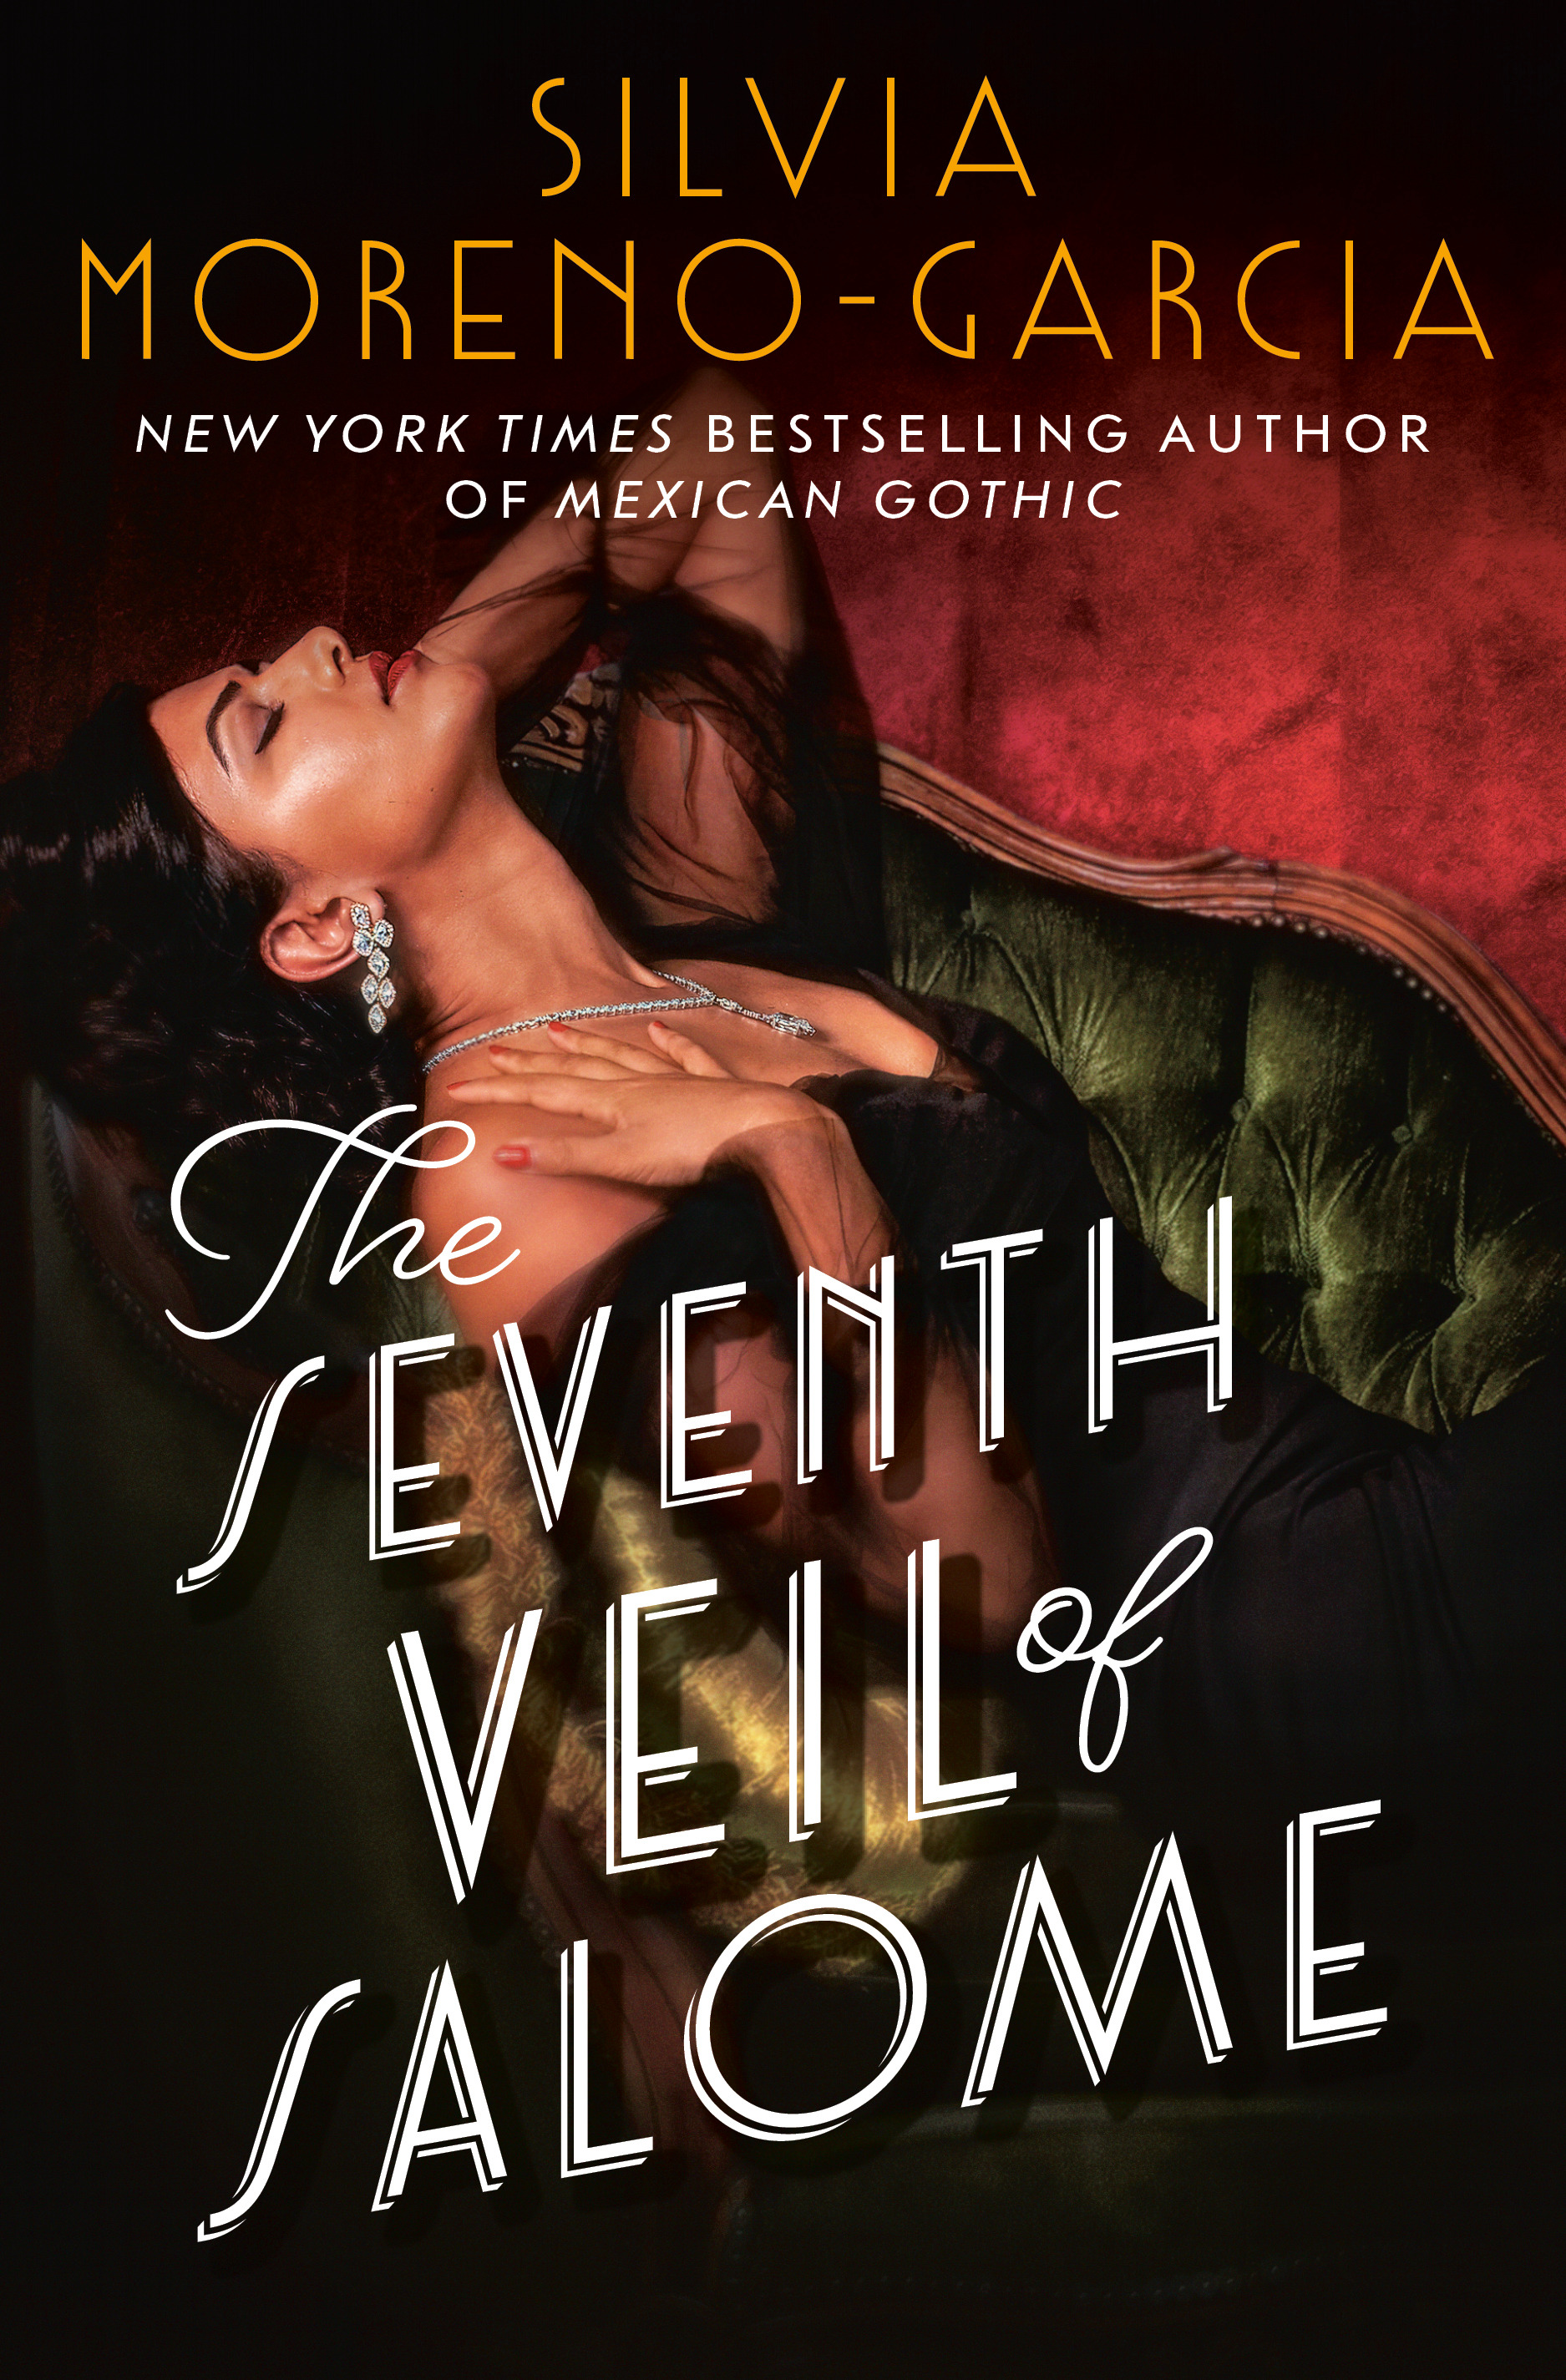 Seventh Veil of Salome, The